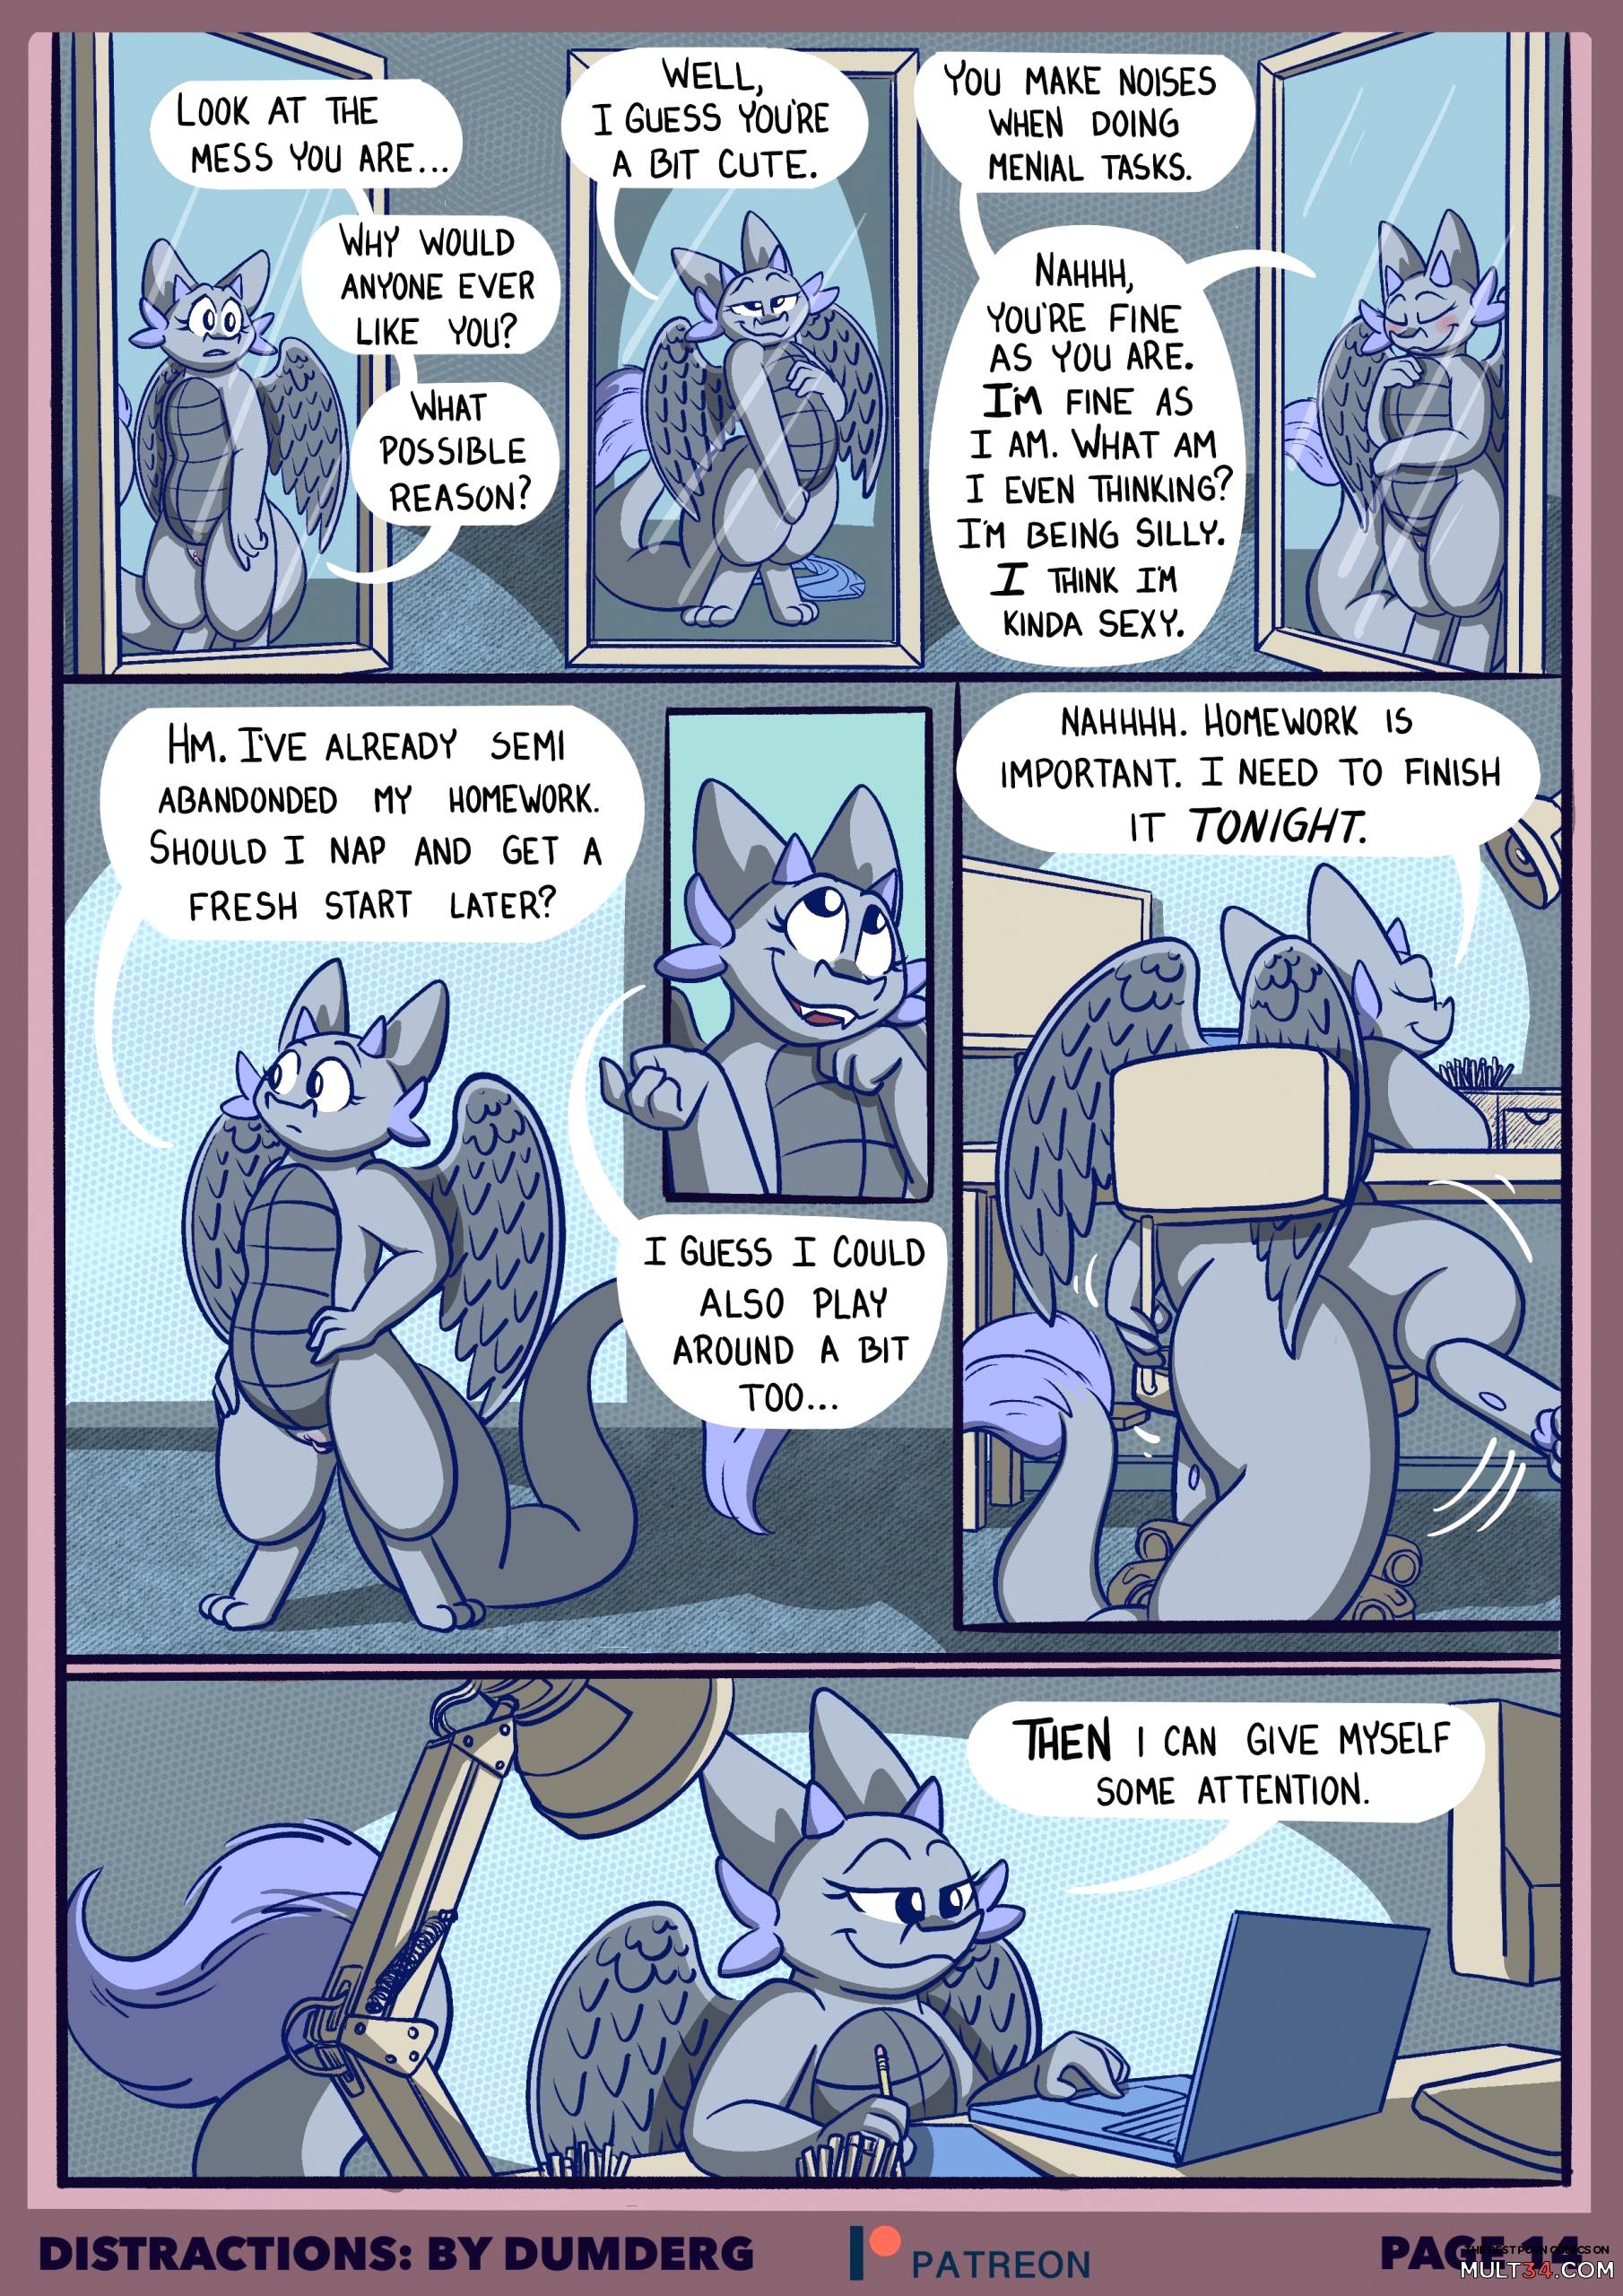 Distractions - DumDerg page 15